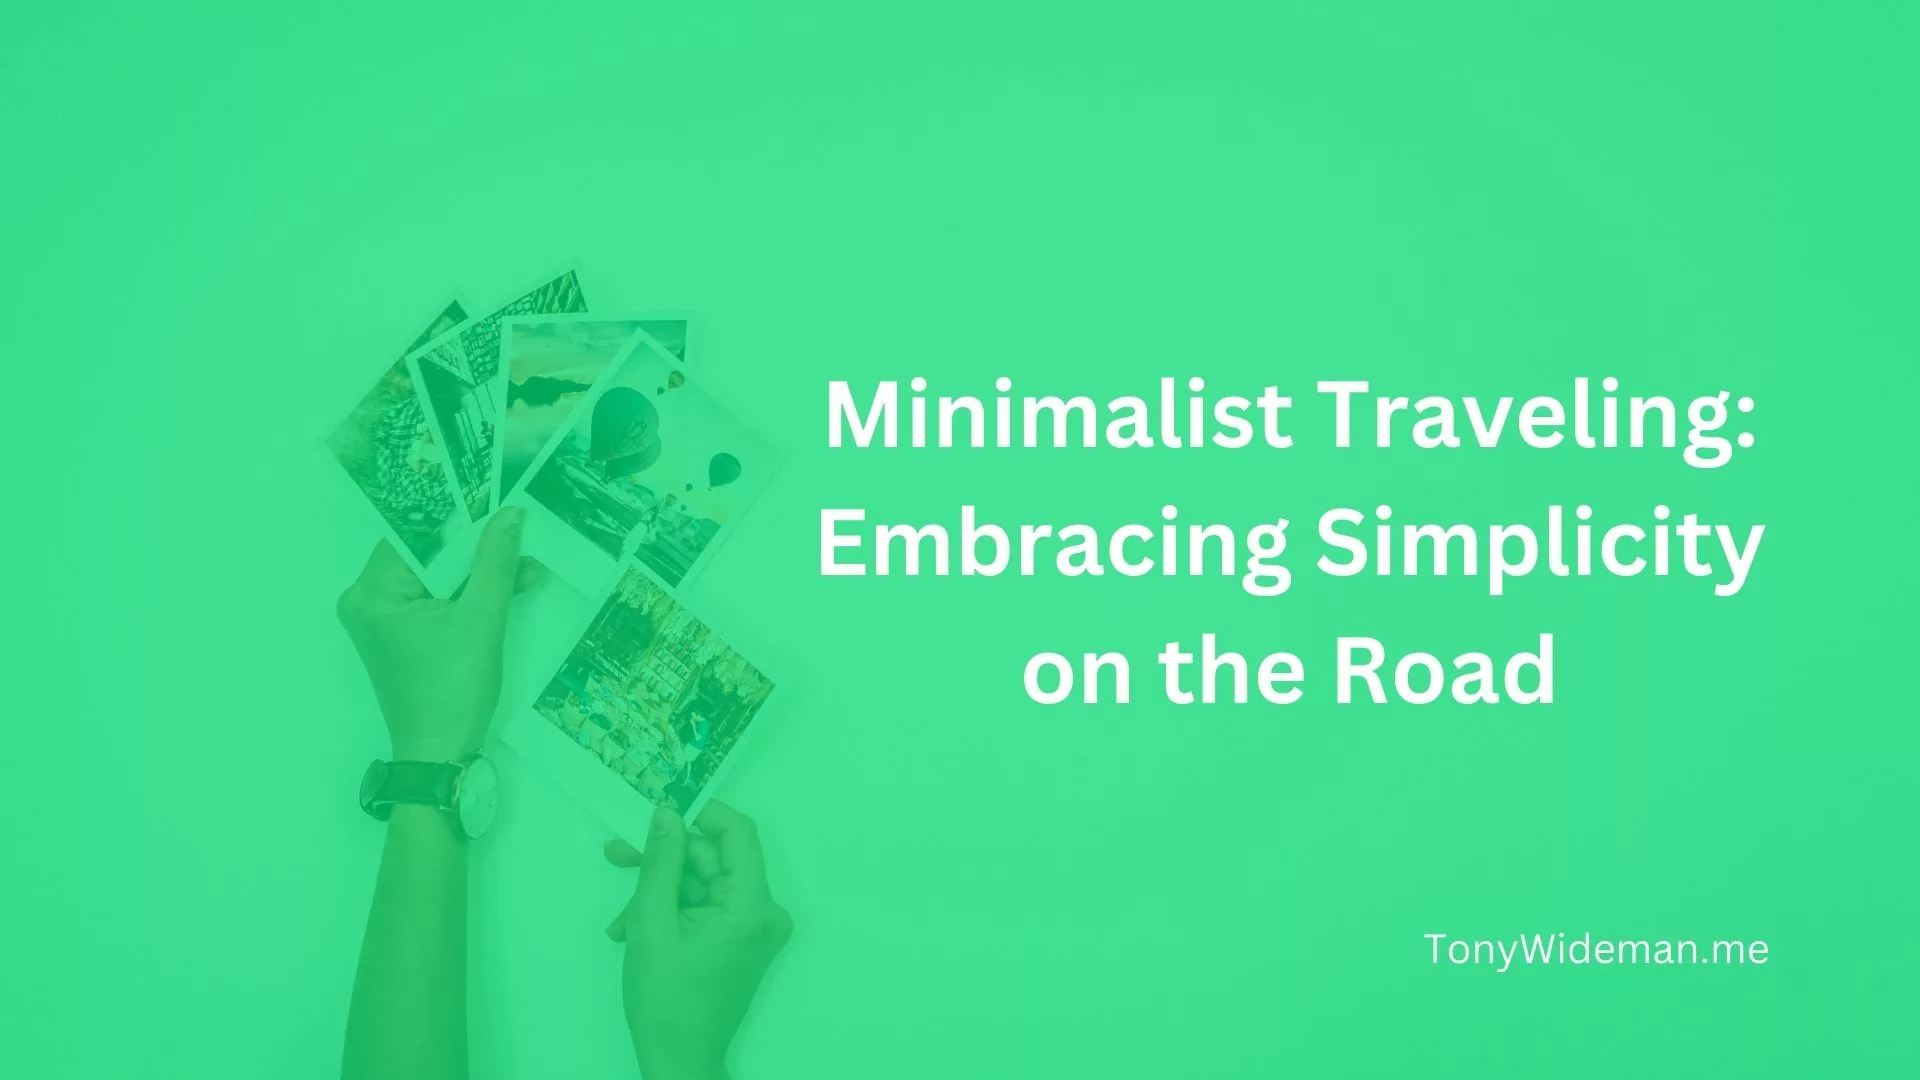 Minimalist Traveling: Embracing Simplicity on the Road